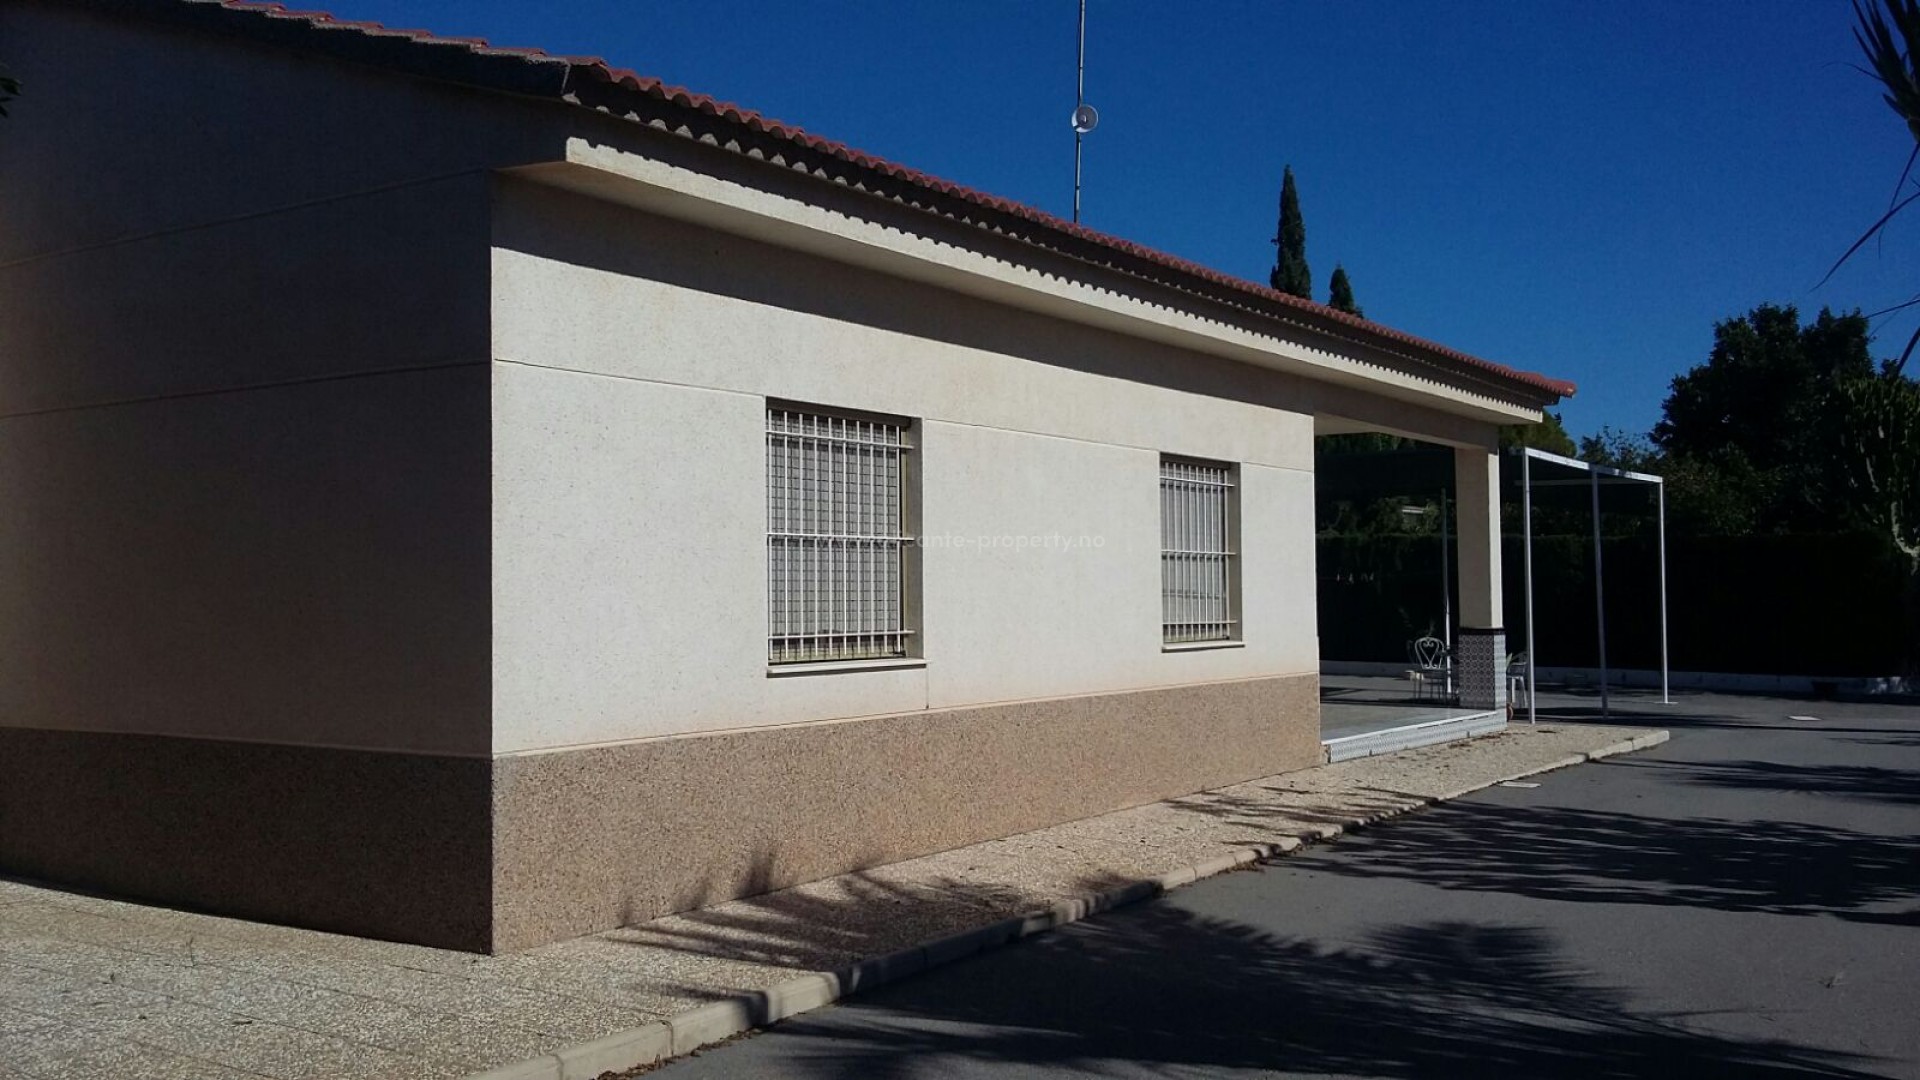 Country Property in Salida Elche